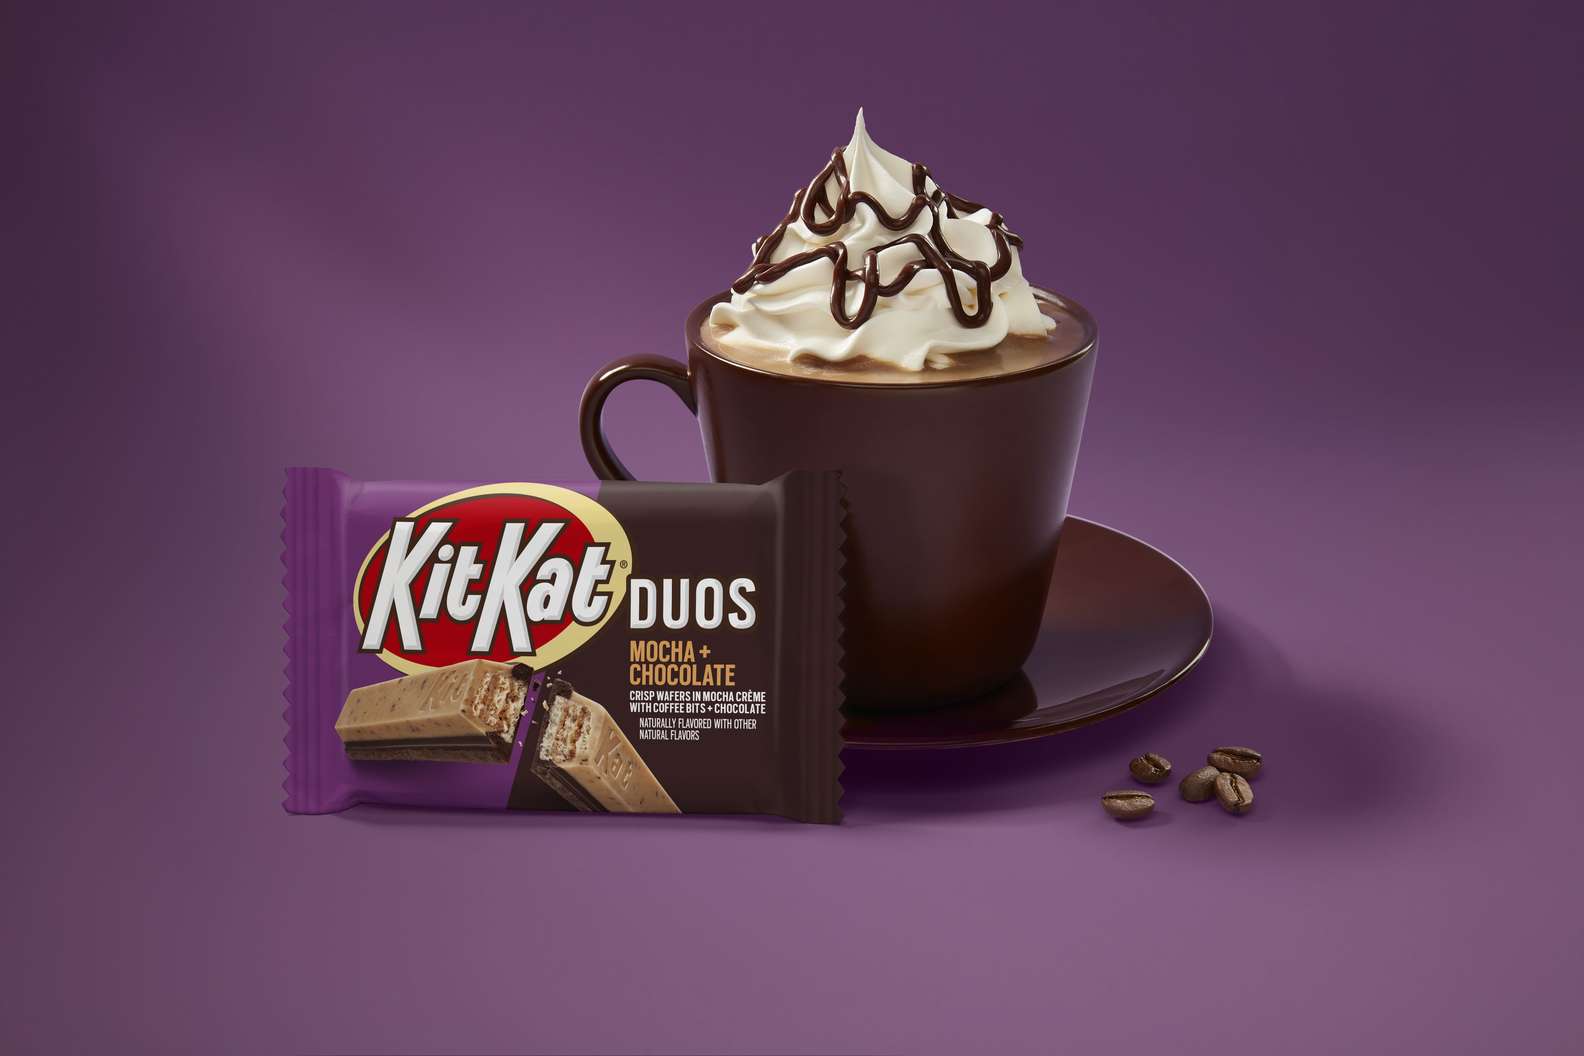 Kit Kat Is Releasing A Mocha Chocolate DUO That’s Insanely Delicious